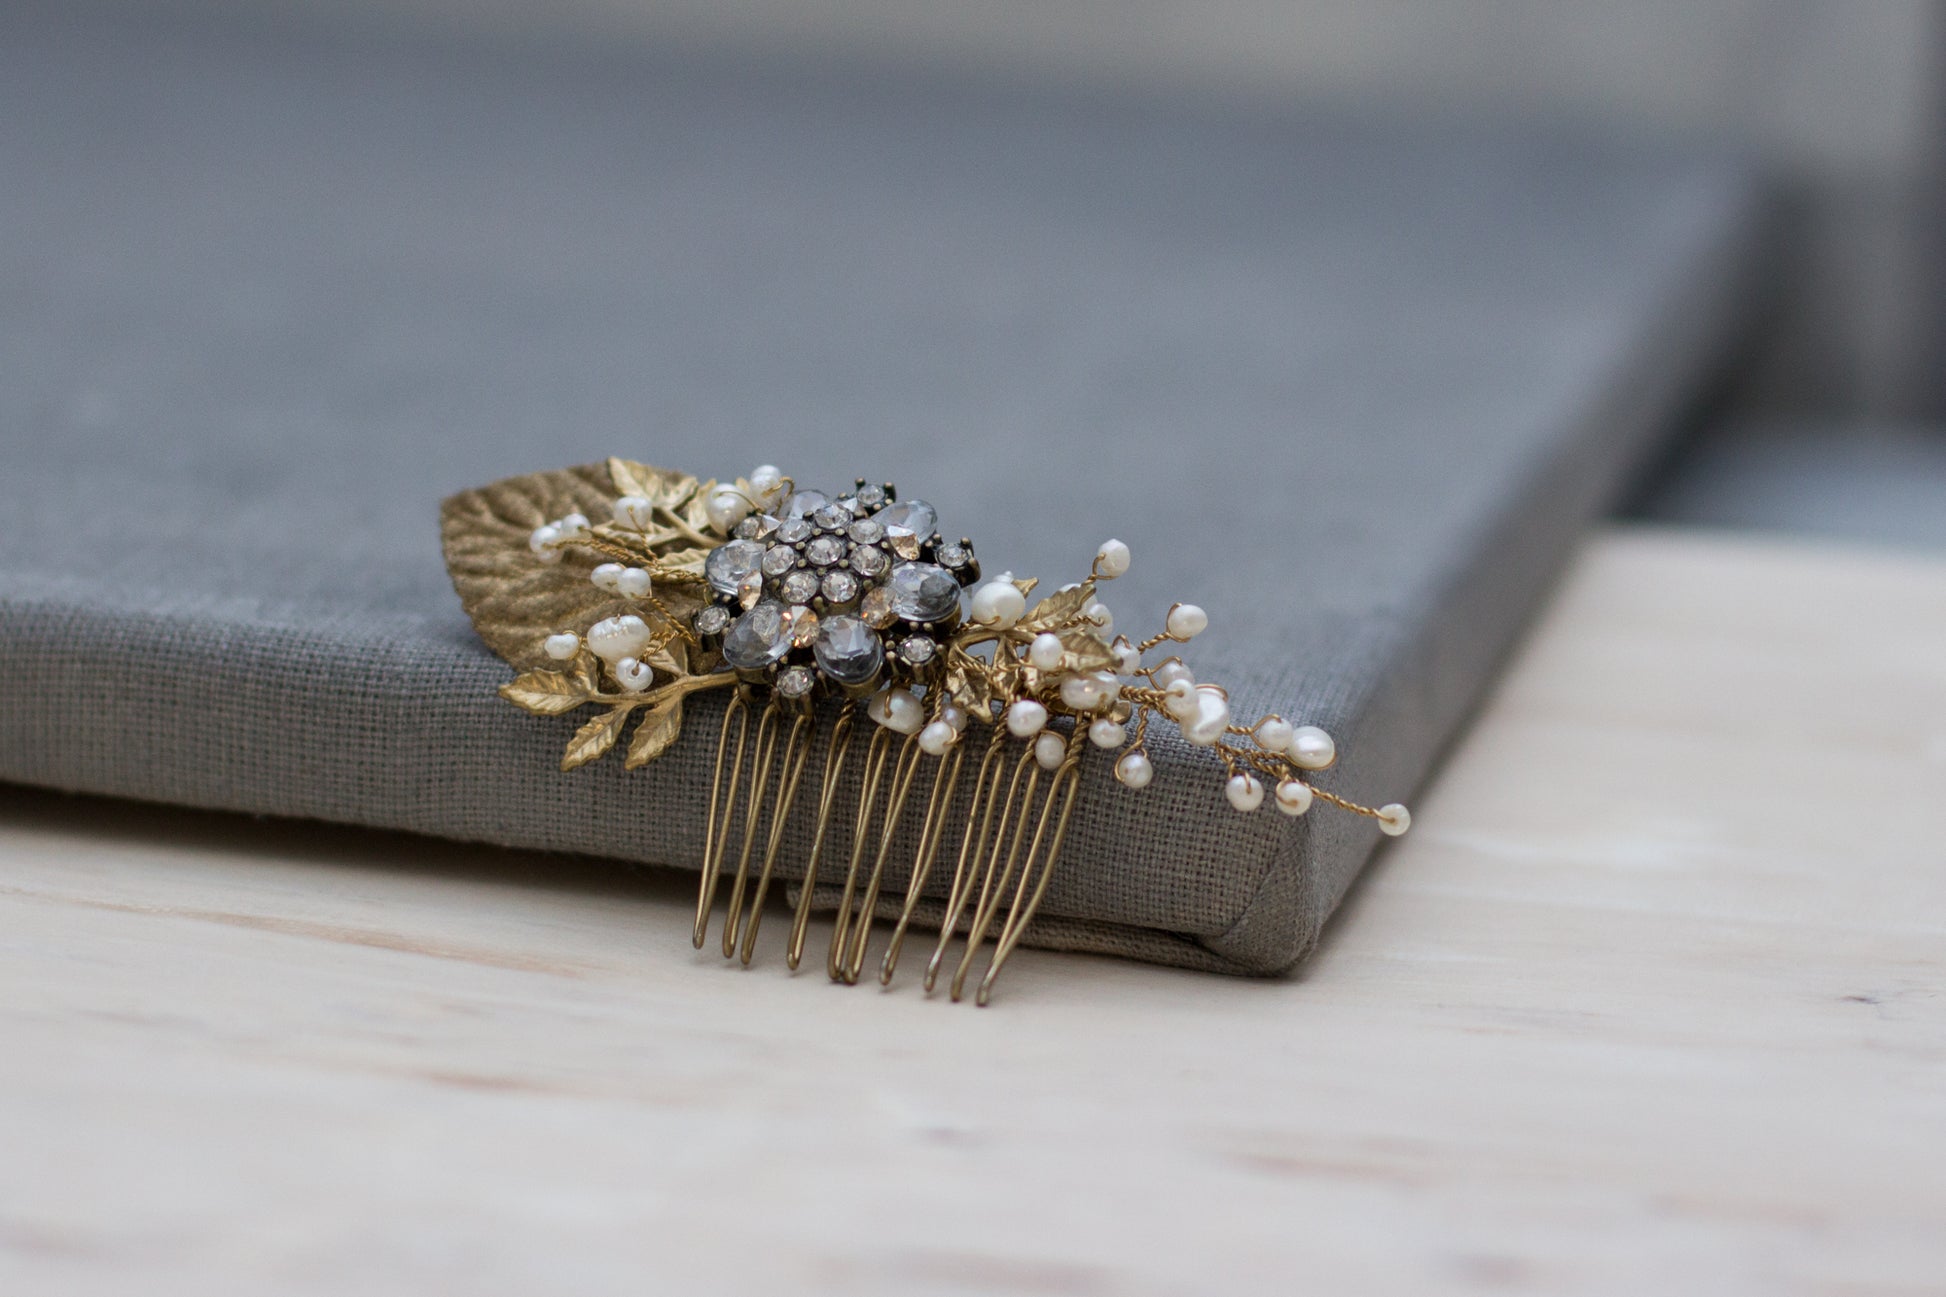 Gold hair comb, Gold Wedding hair accessories, Gold Bridal hairpiece, Pearl Wedding headpiece, Gold fascinator, Wedding fascinator. Pearl hair comb. Crystal hair comb. Crystal headpiece.